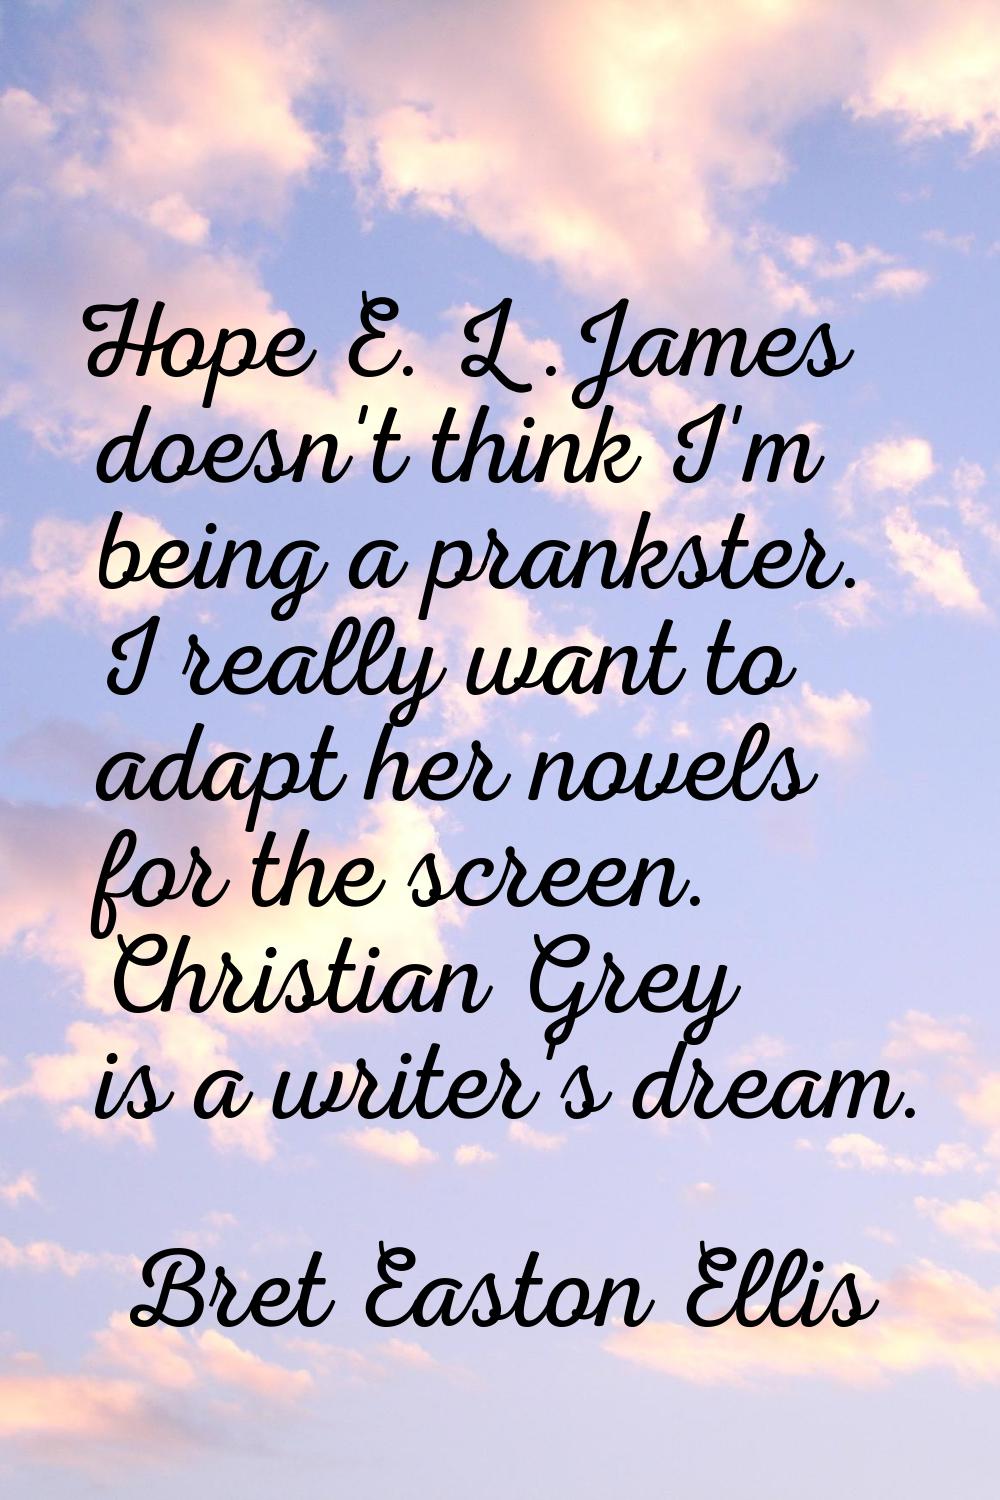 Hope E. L .James doesn't think I'm being a prankster. I really want to adapt her novels for the scr